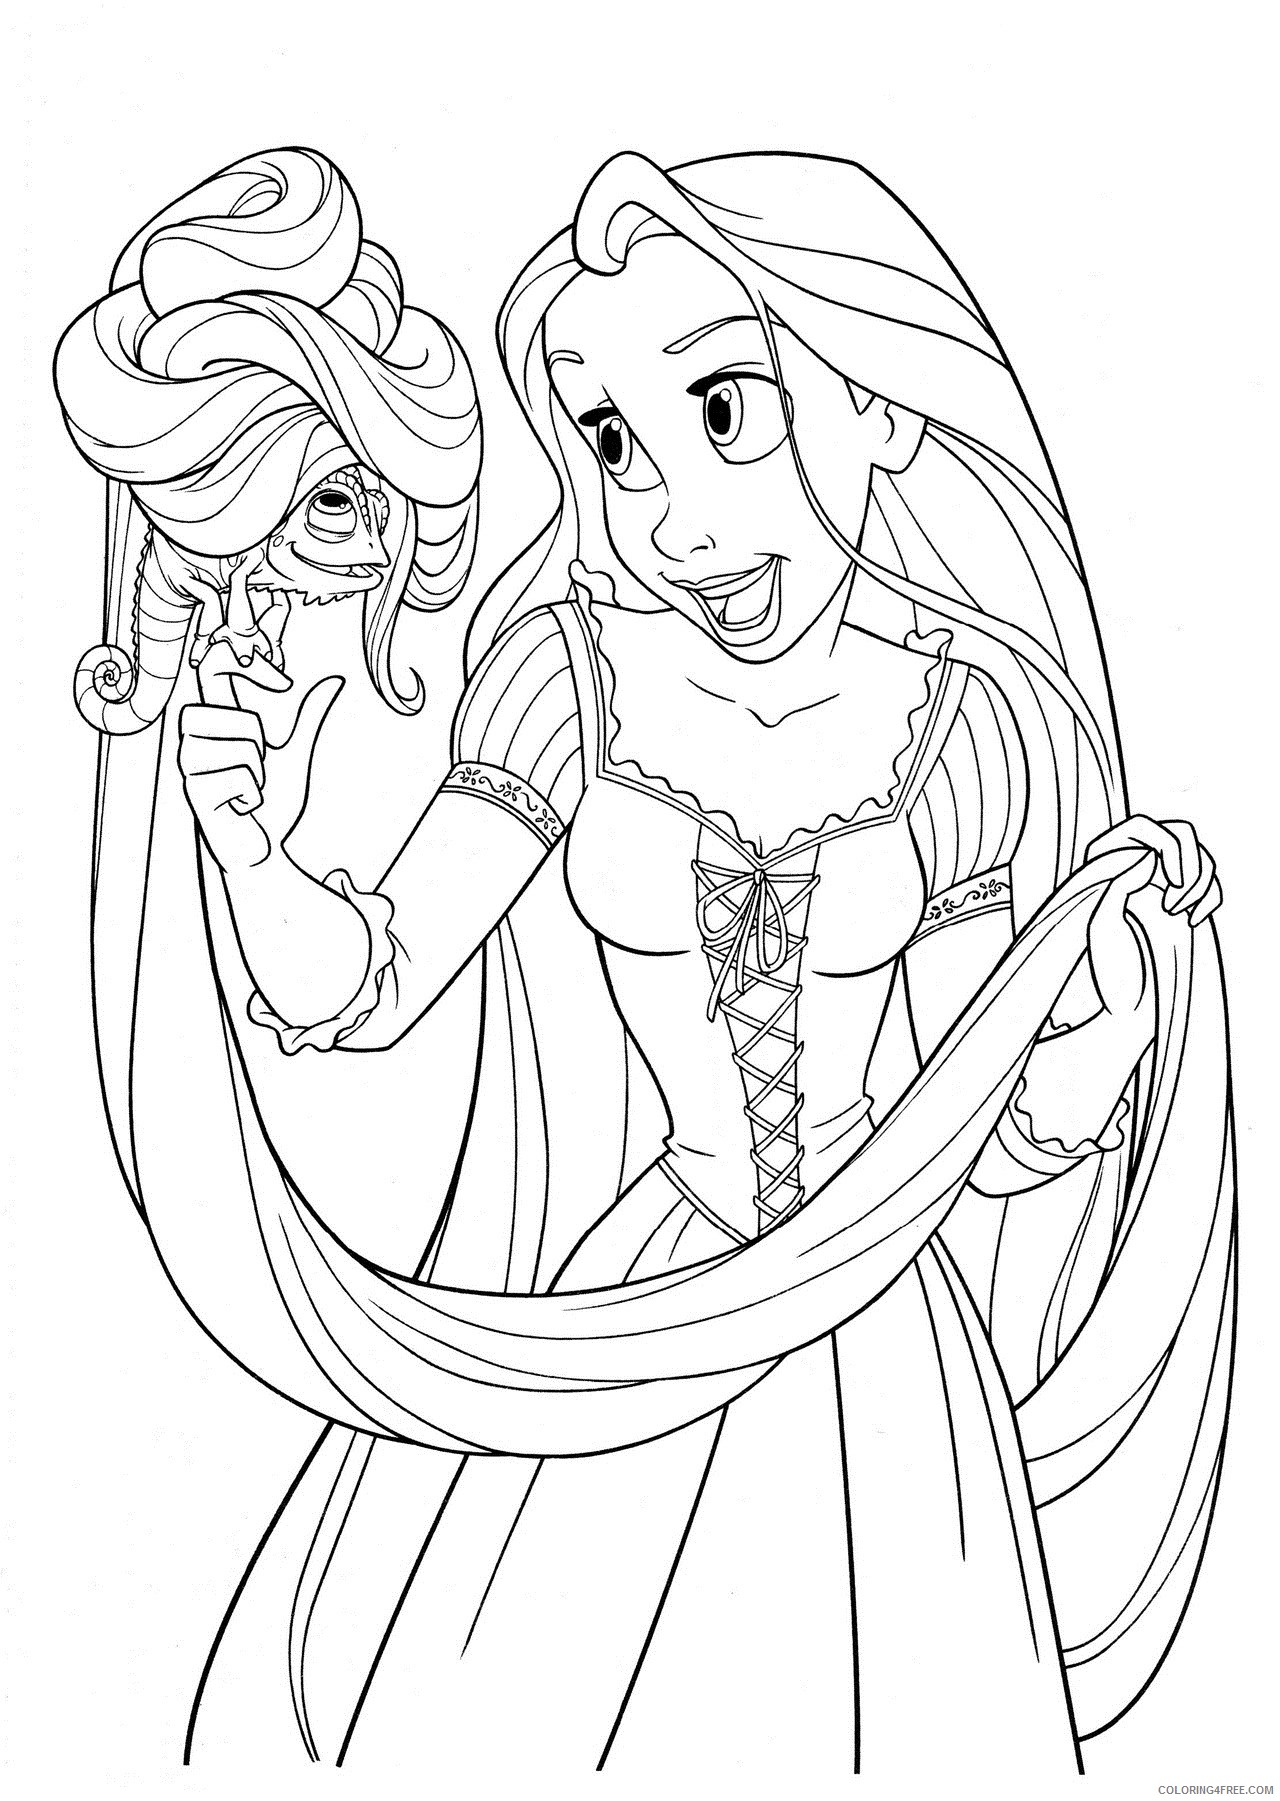 Rapunzel Coloring Pages Cartoons Rapunzel and Pascal Printable 2020 5305 Coloring4free